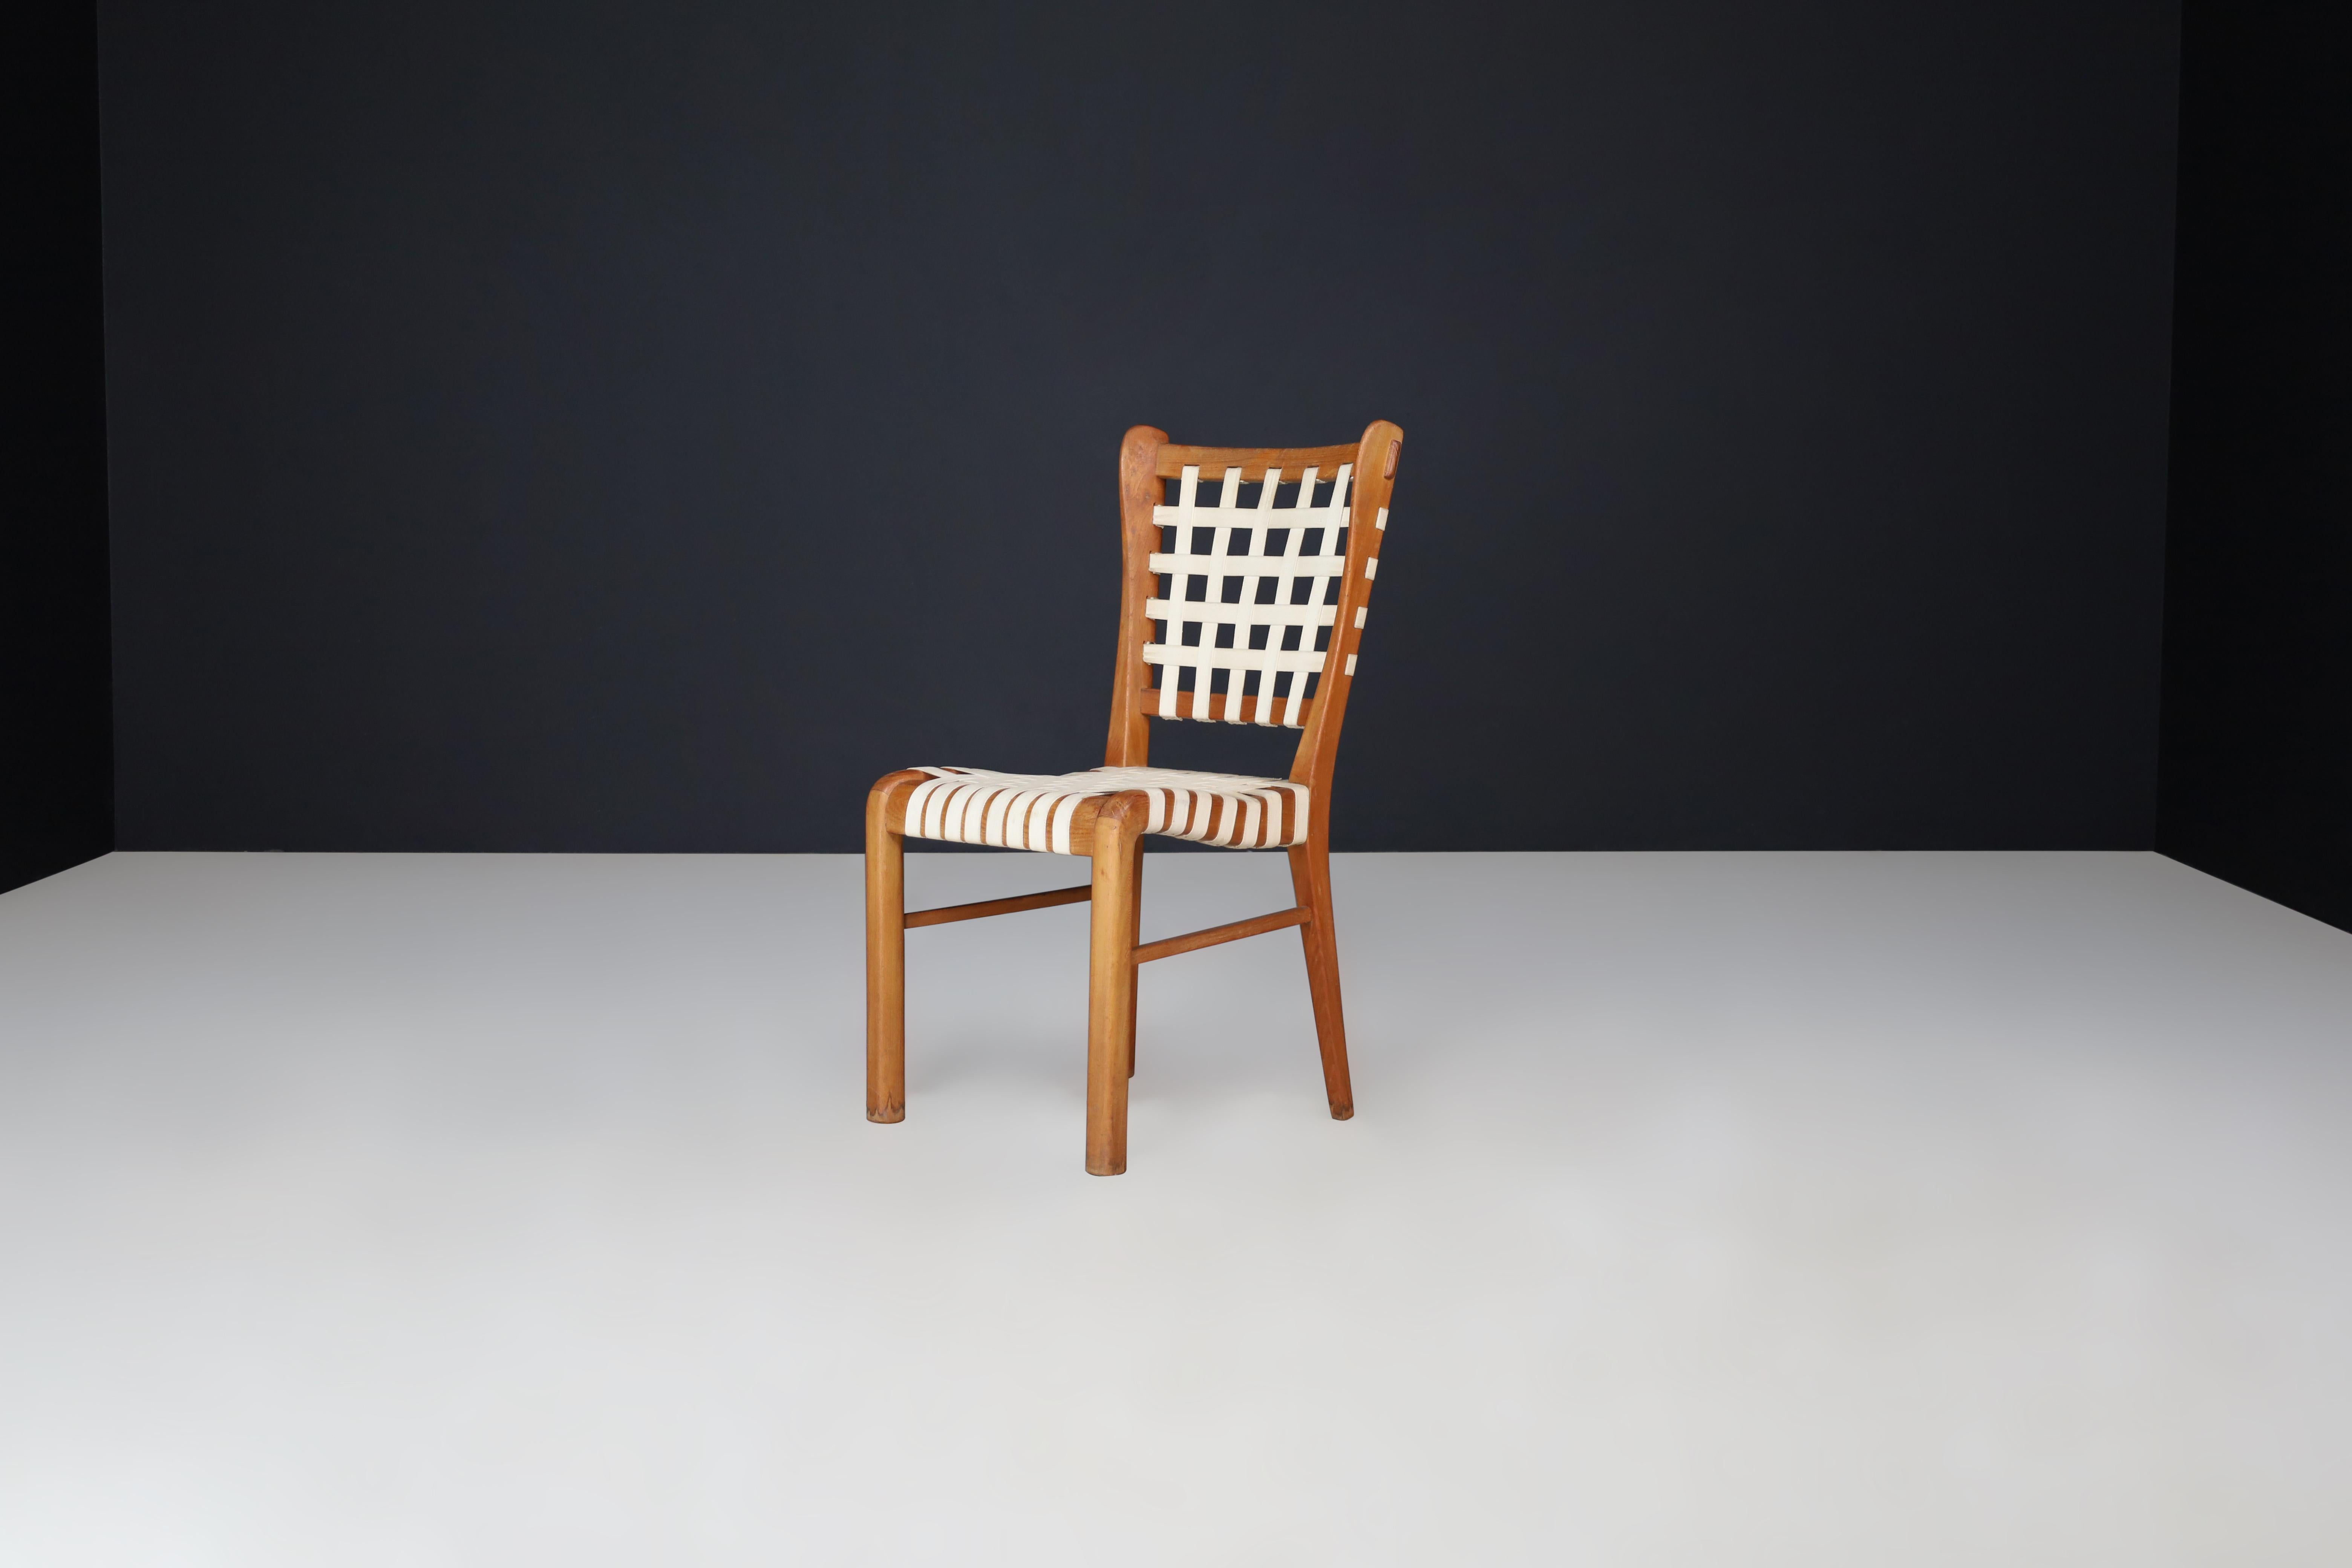 Sculptural oak side chair by Guglielmo Pecorini, Italy, the 1950s

This describes a midcentury sculptural chair designed by Guglielmo Pecorini in the 1950s. The chair is made with an oak frame and linen straps, exhibiting signs of aging and use, but